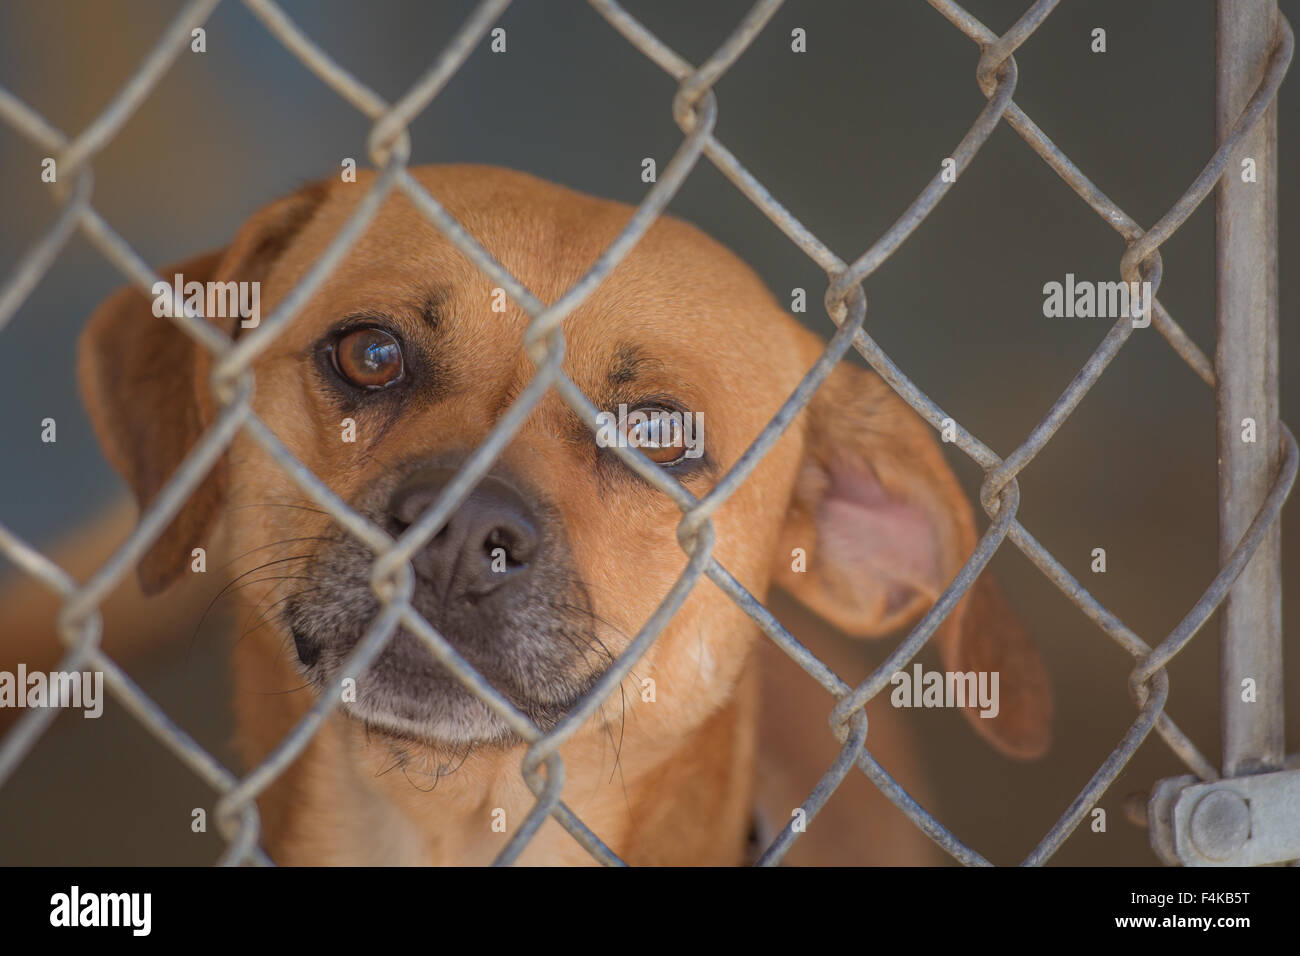 Dog looking through chain link fence Stock Photo